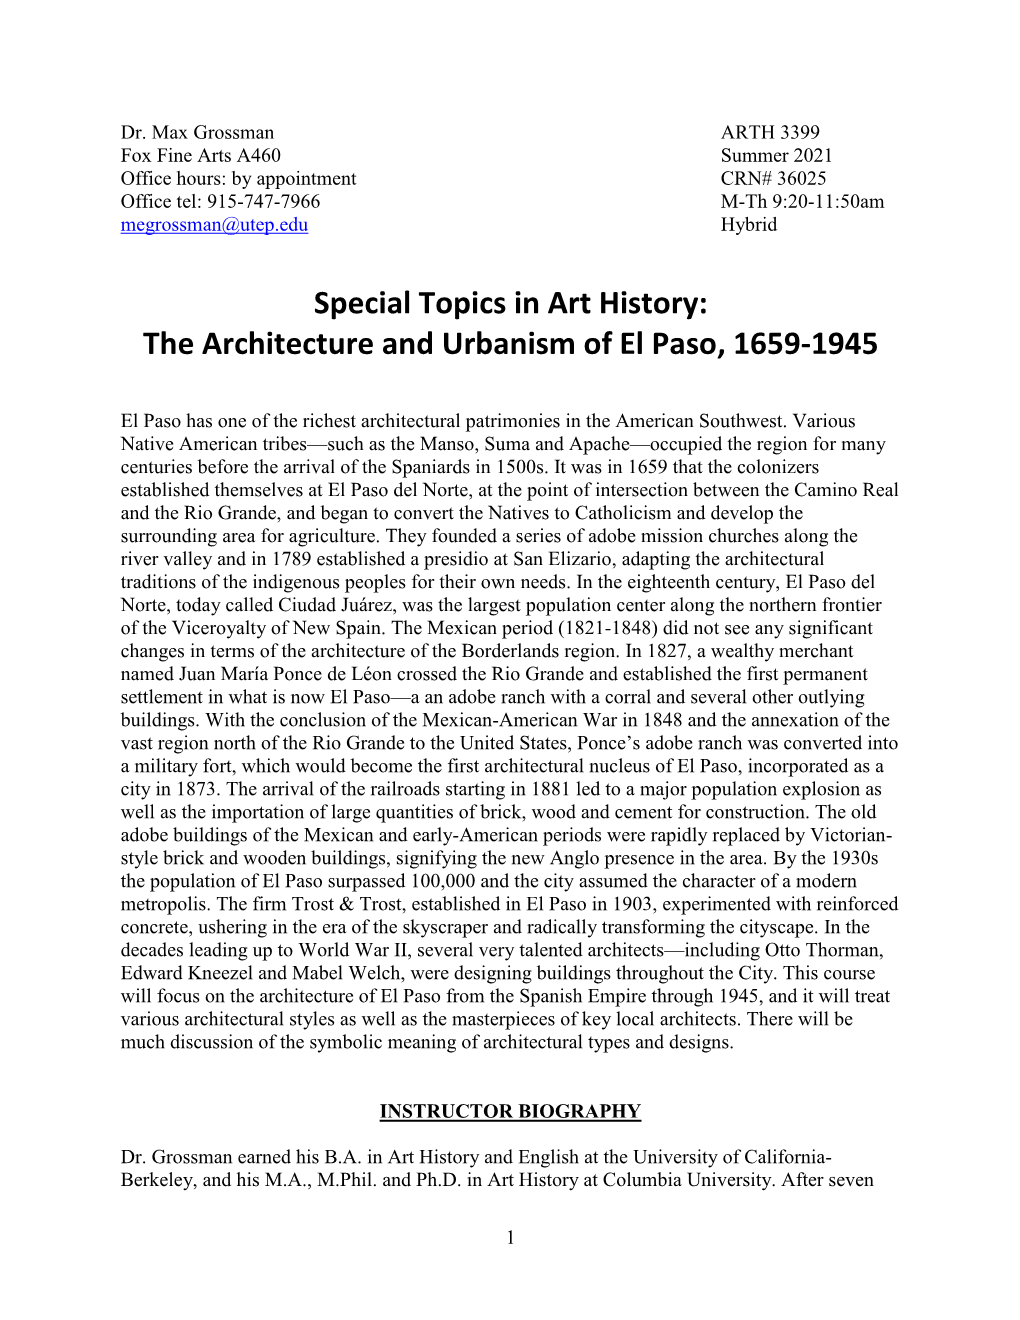 Special Topics in Art History: the Architecture and Urbanism of El Paso, 1659-1945